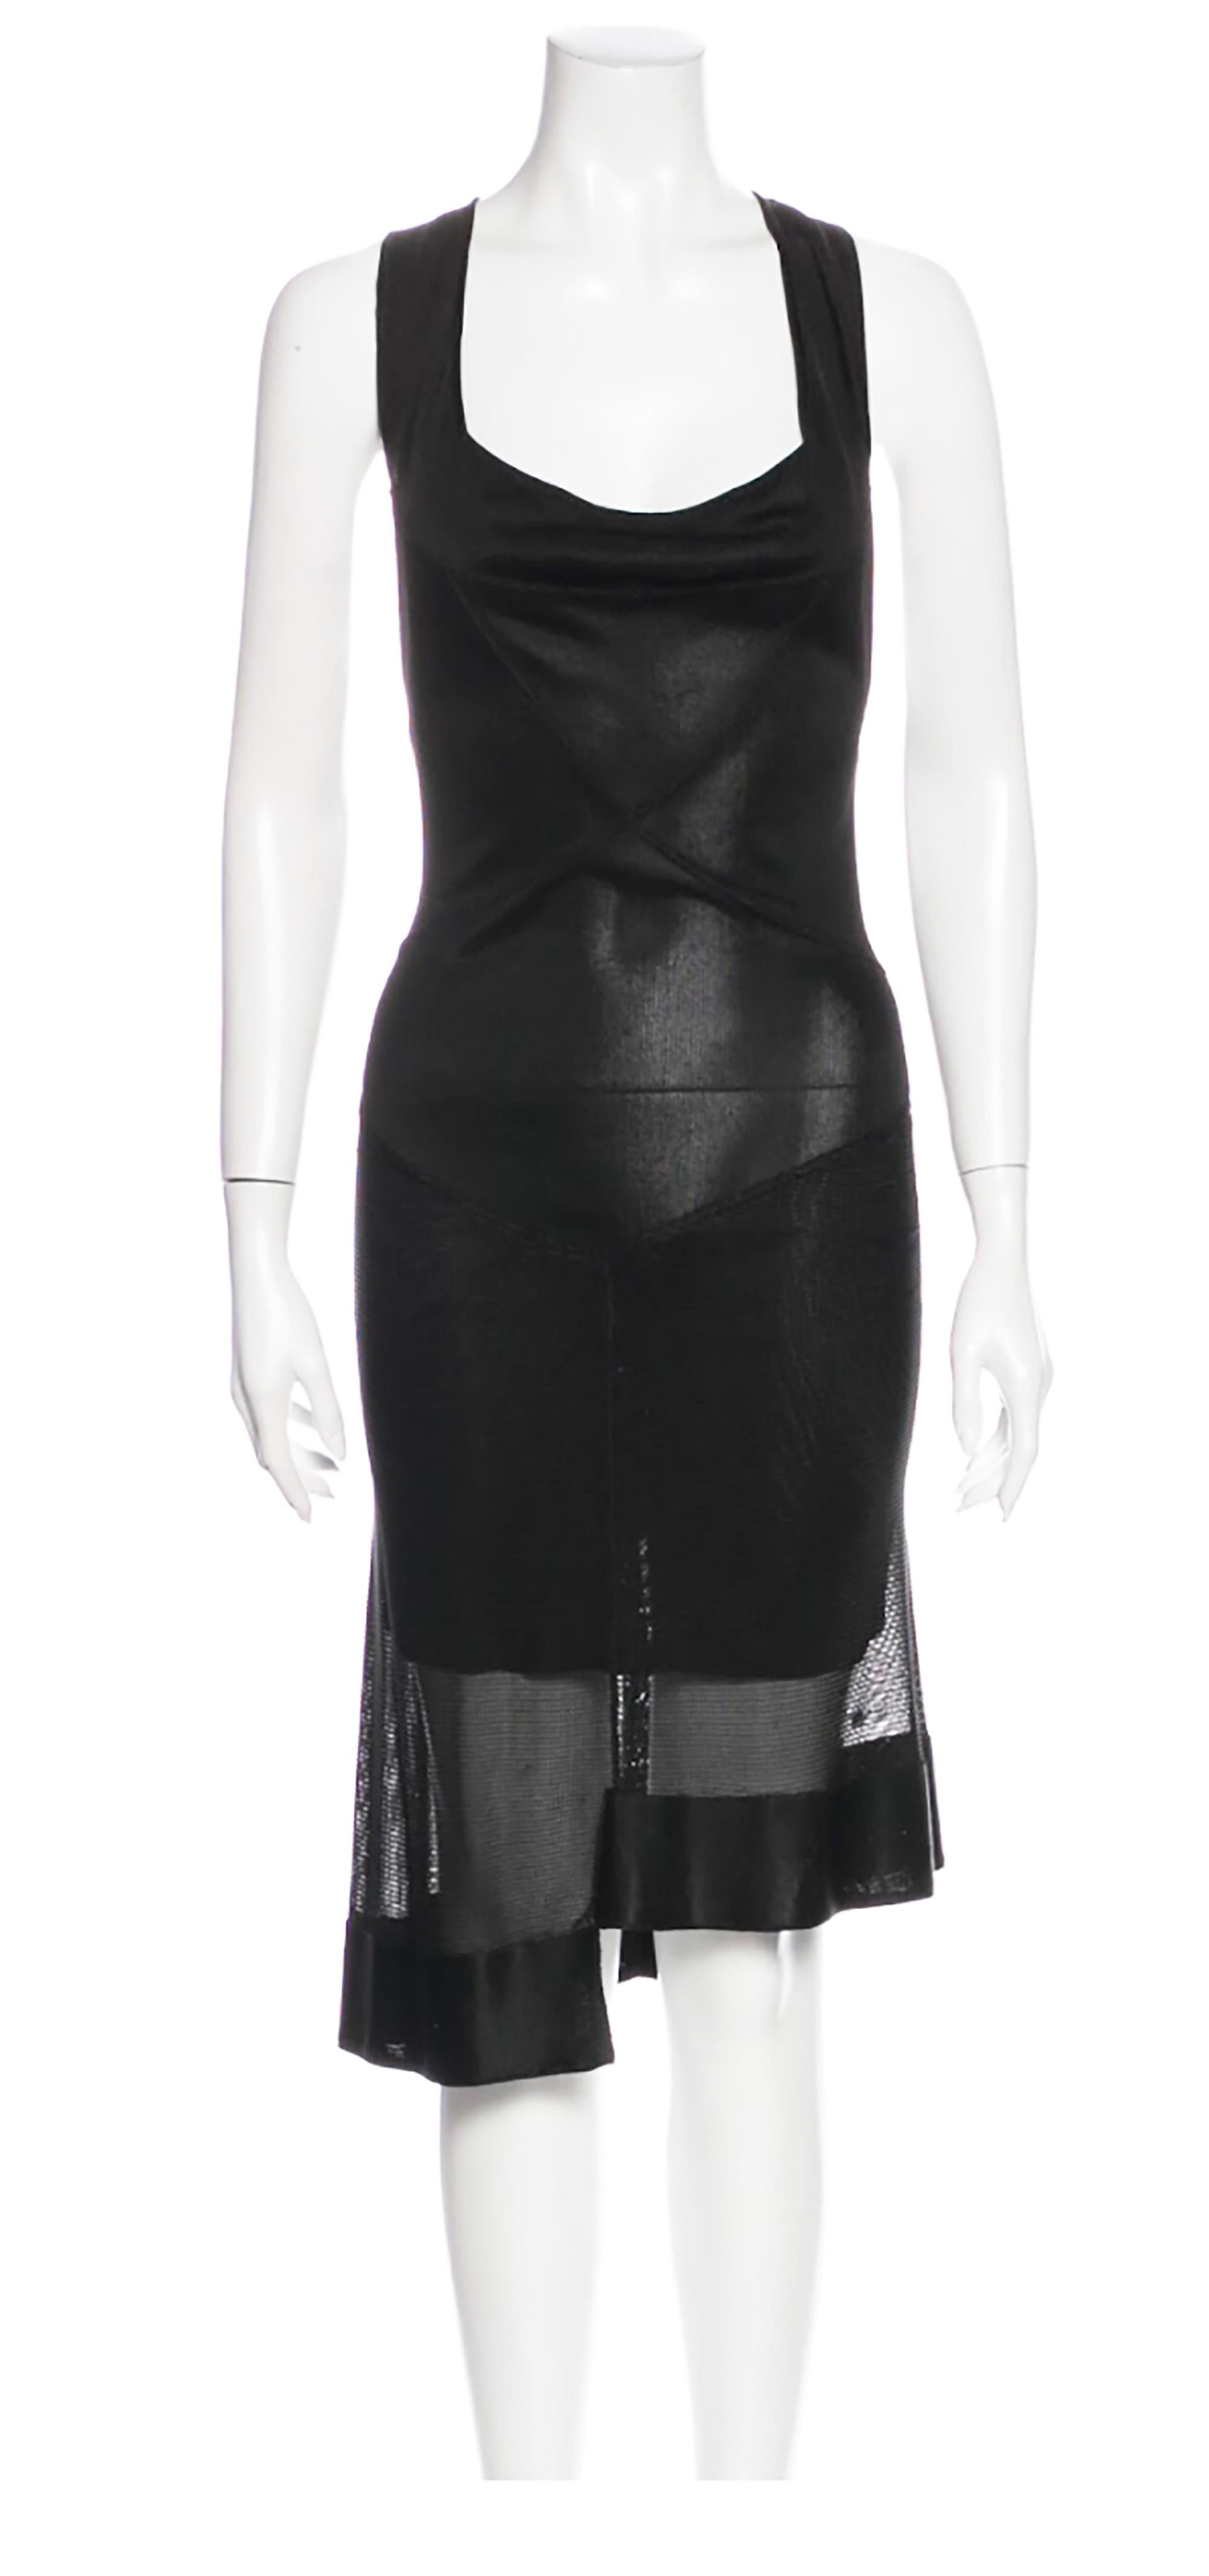 1990s Alaia Black Sheer Criss Cross Dress In Excellent Condition For Sale In Austin, TX